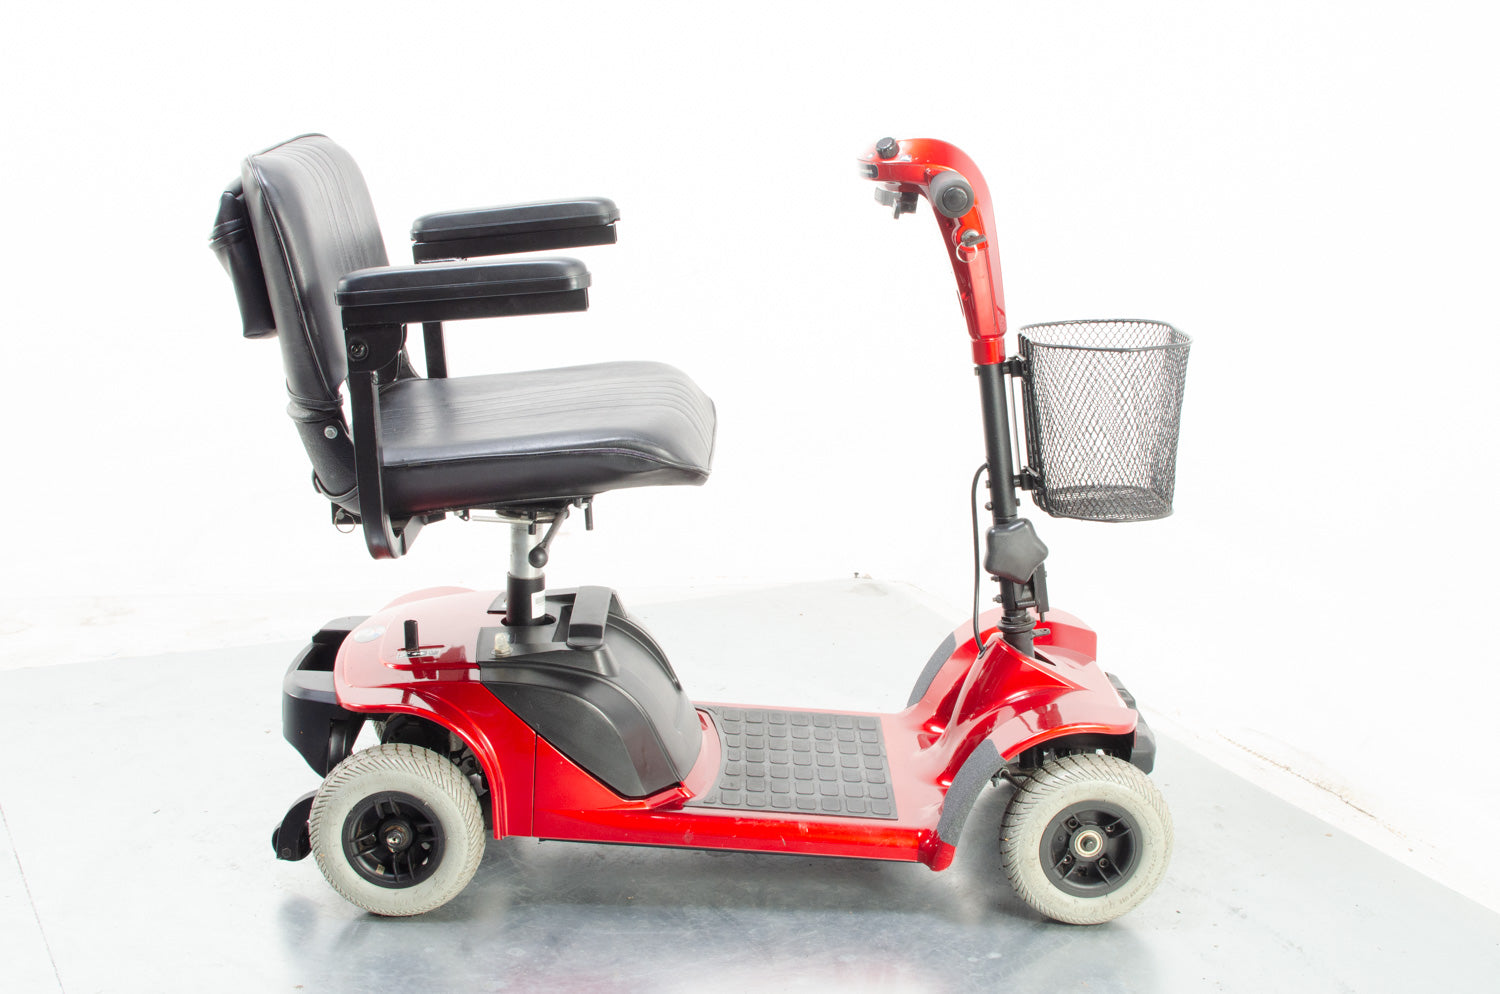 2006 Rascal Taxi Electric Mobility Scooter Small Transportable 4mph in Red